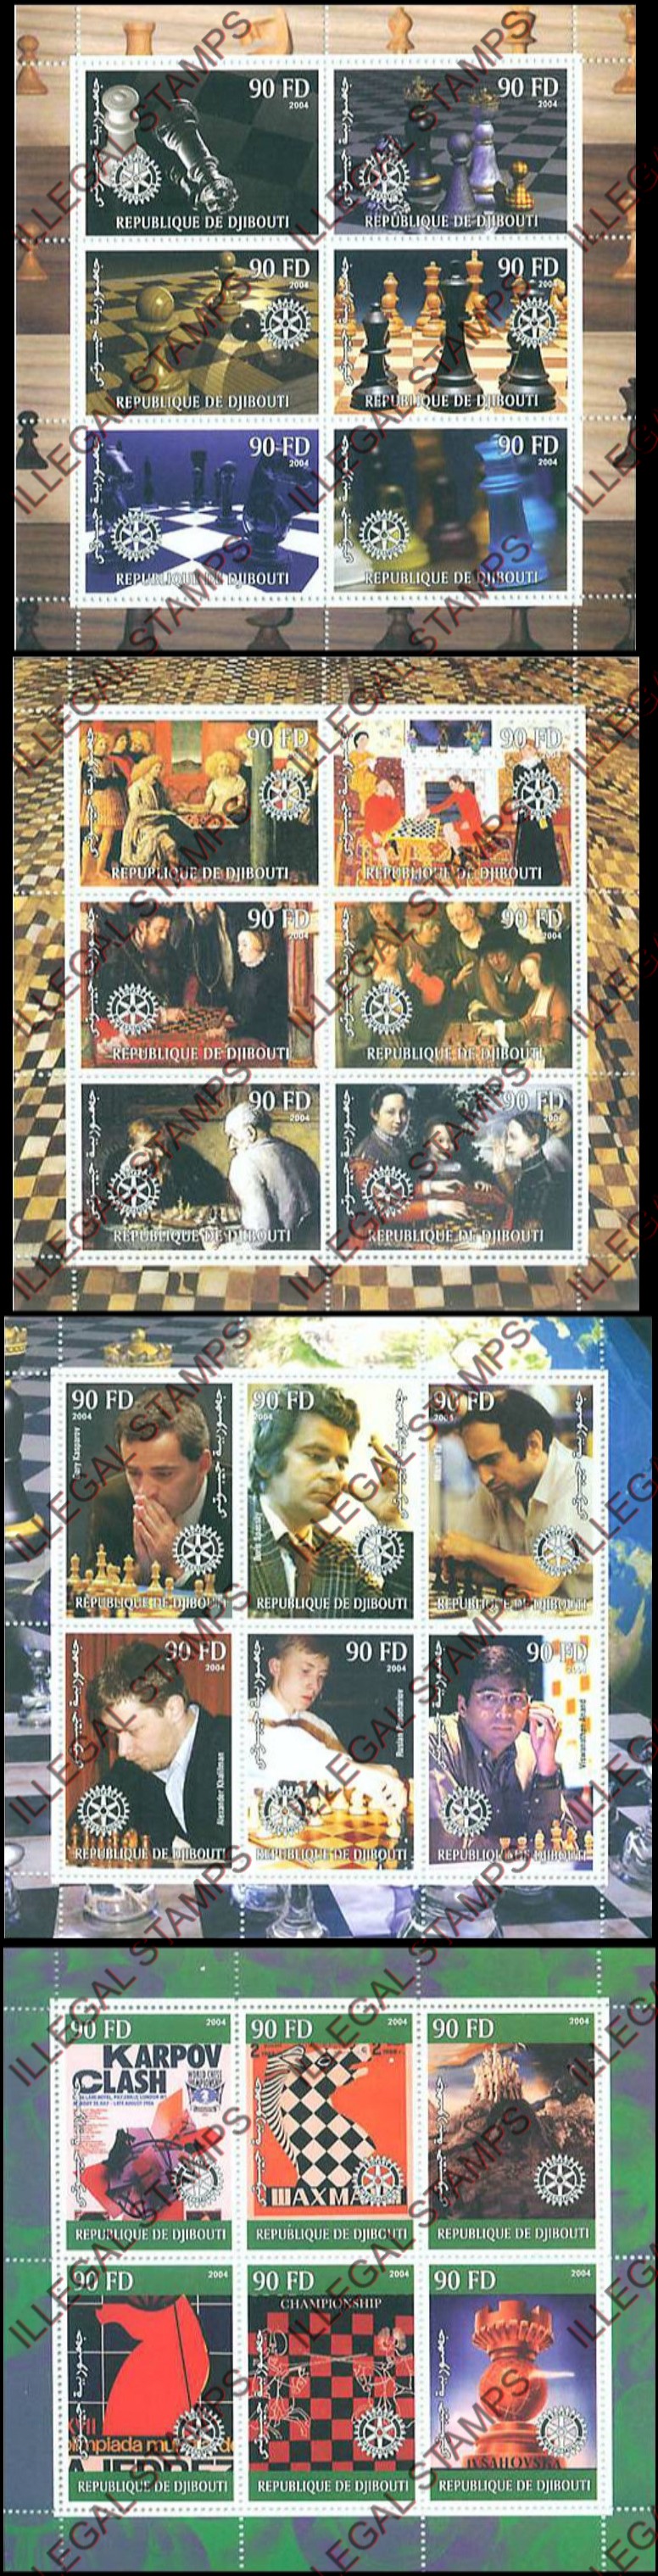 Djibouti 2004 Chess Illegal Stamp Sheetlets of 6